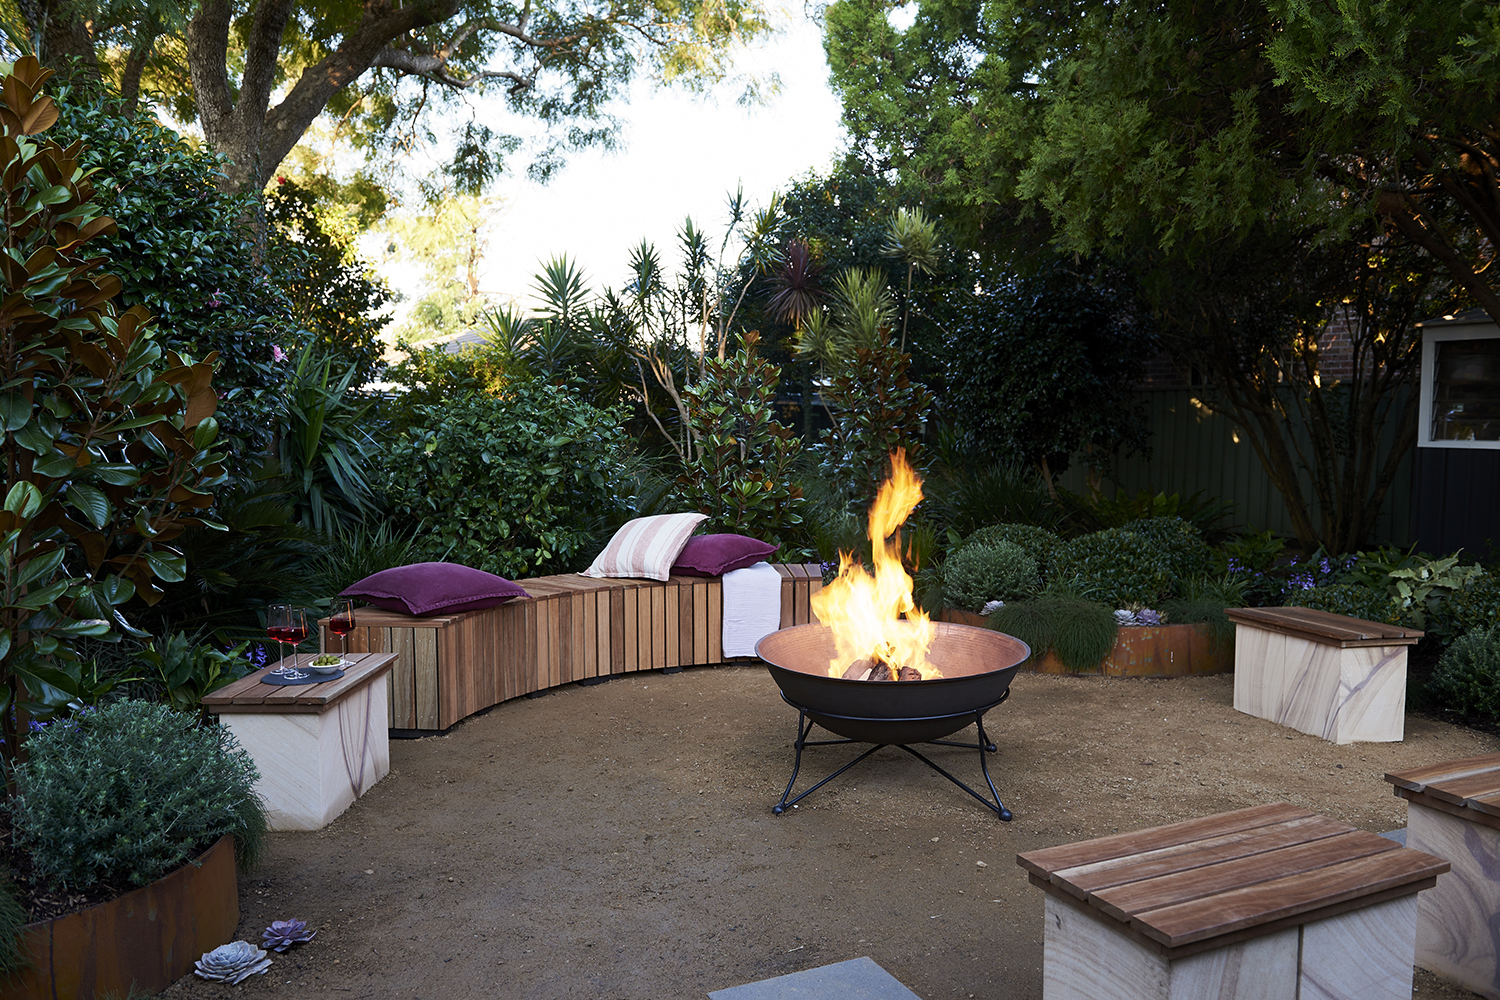 Adam Dovile Make A Fire Pit, How To Put Out A Backyard Fire Pit